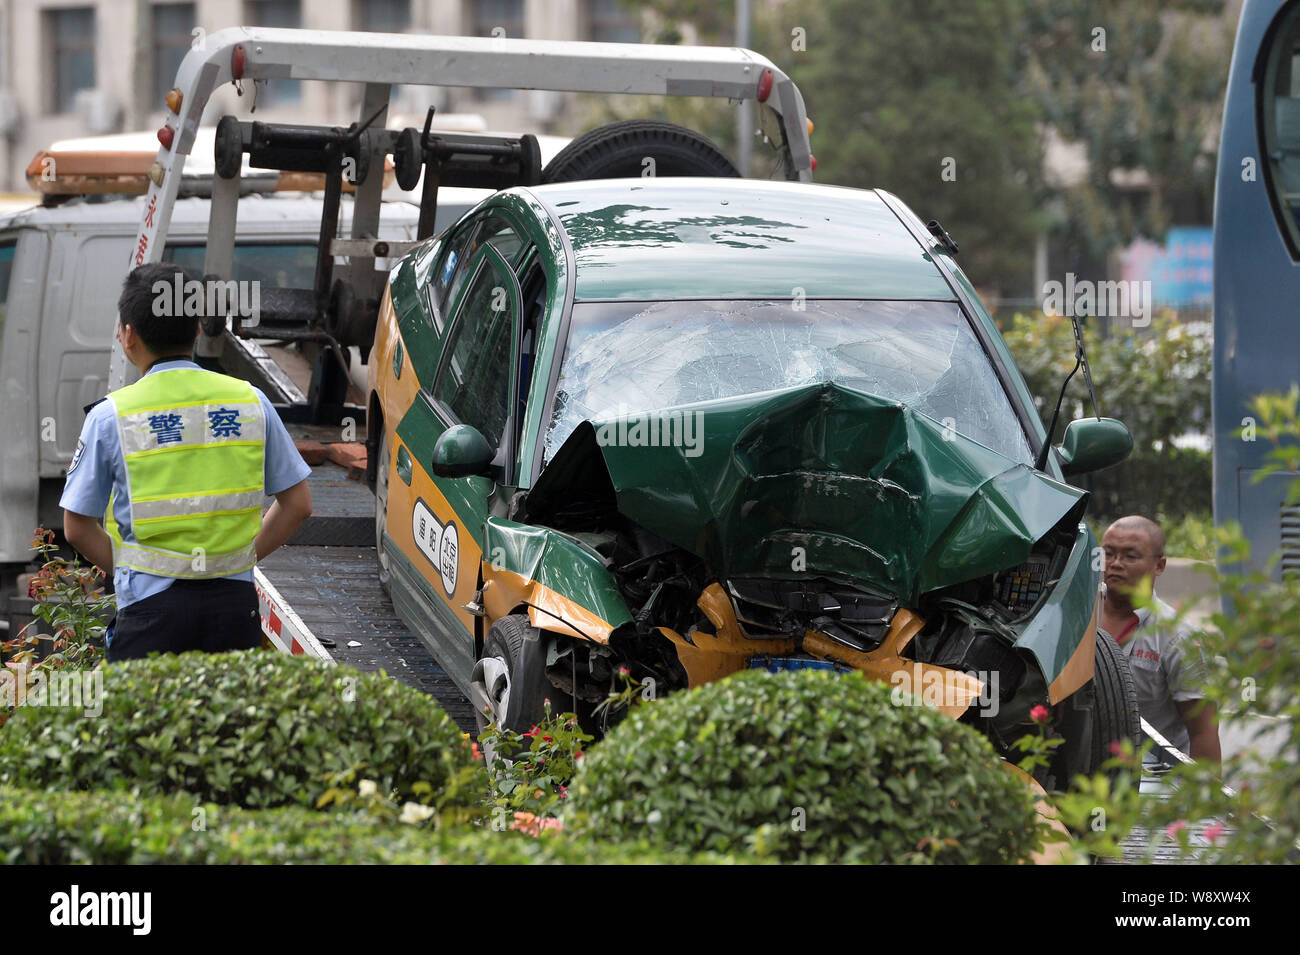 The damaged taxi is loaded onto a trailer after it crashed into a tree, killing 3 people, on the Third Ring Road in Beijing, China, 24 August 2014. Stock Photo